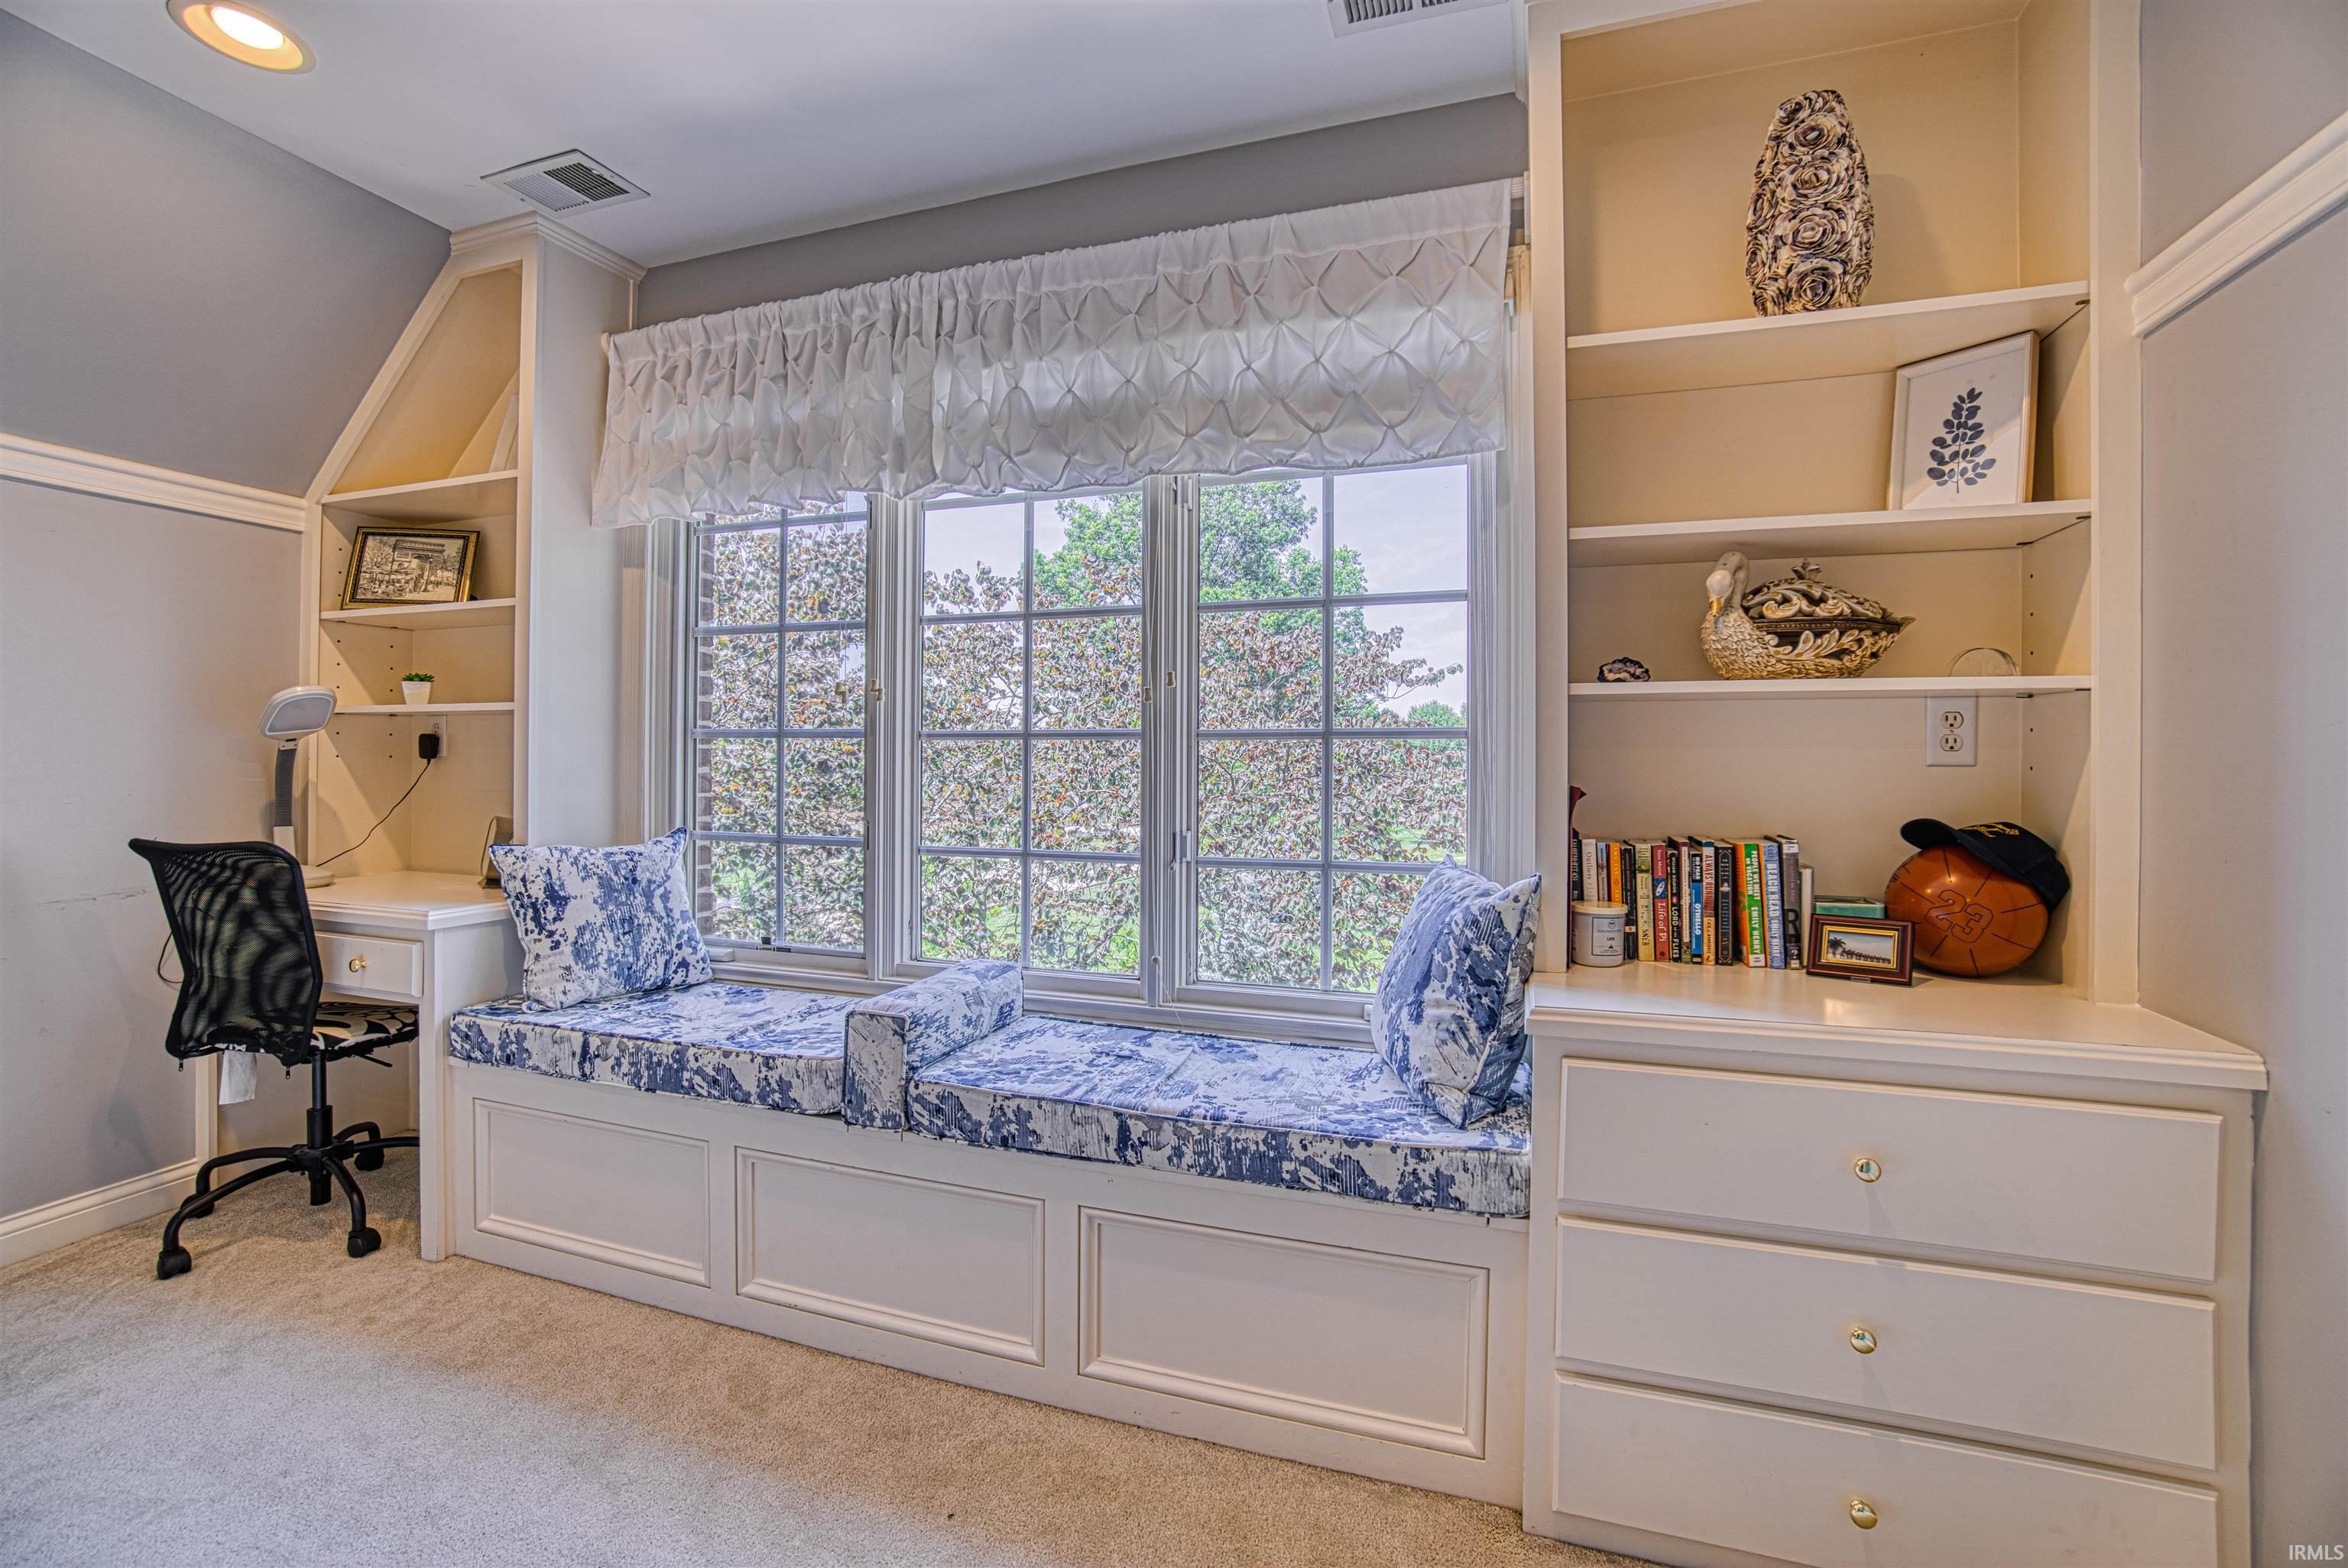 Sitting window with bench storage and built-ins